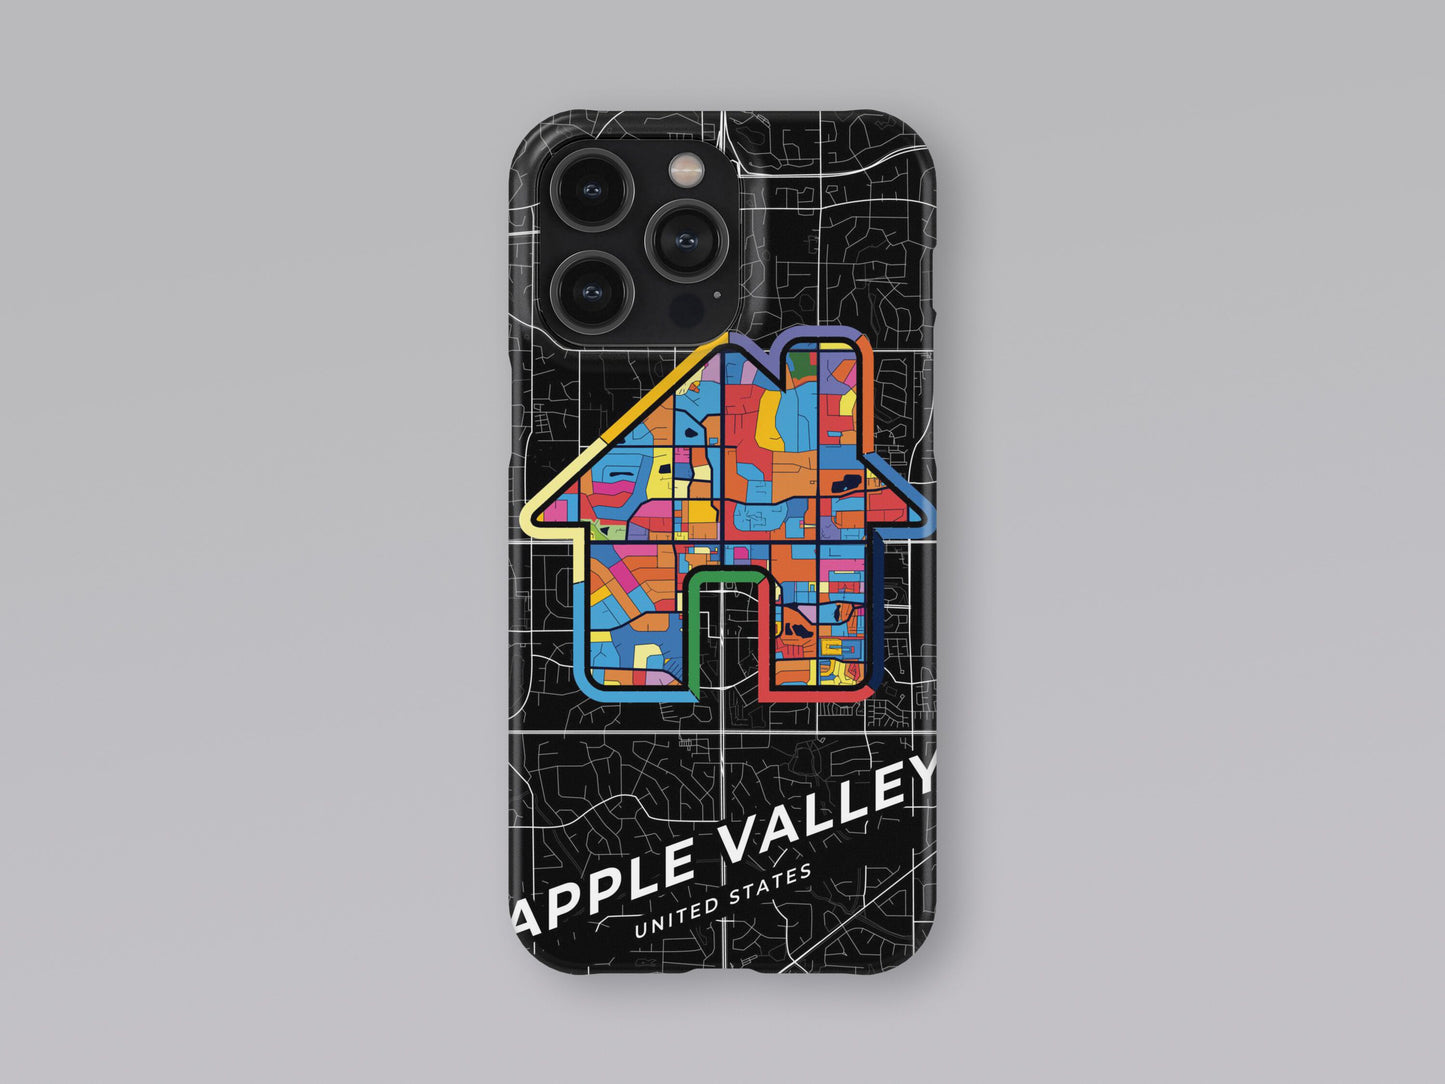 Apple Valley Minnesota slim phone case with colorful icon. Birthday, wedding or housewarming gift. Couple match cases. 3